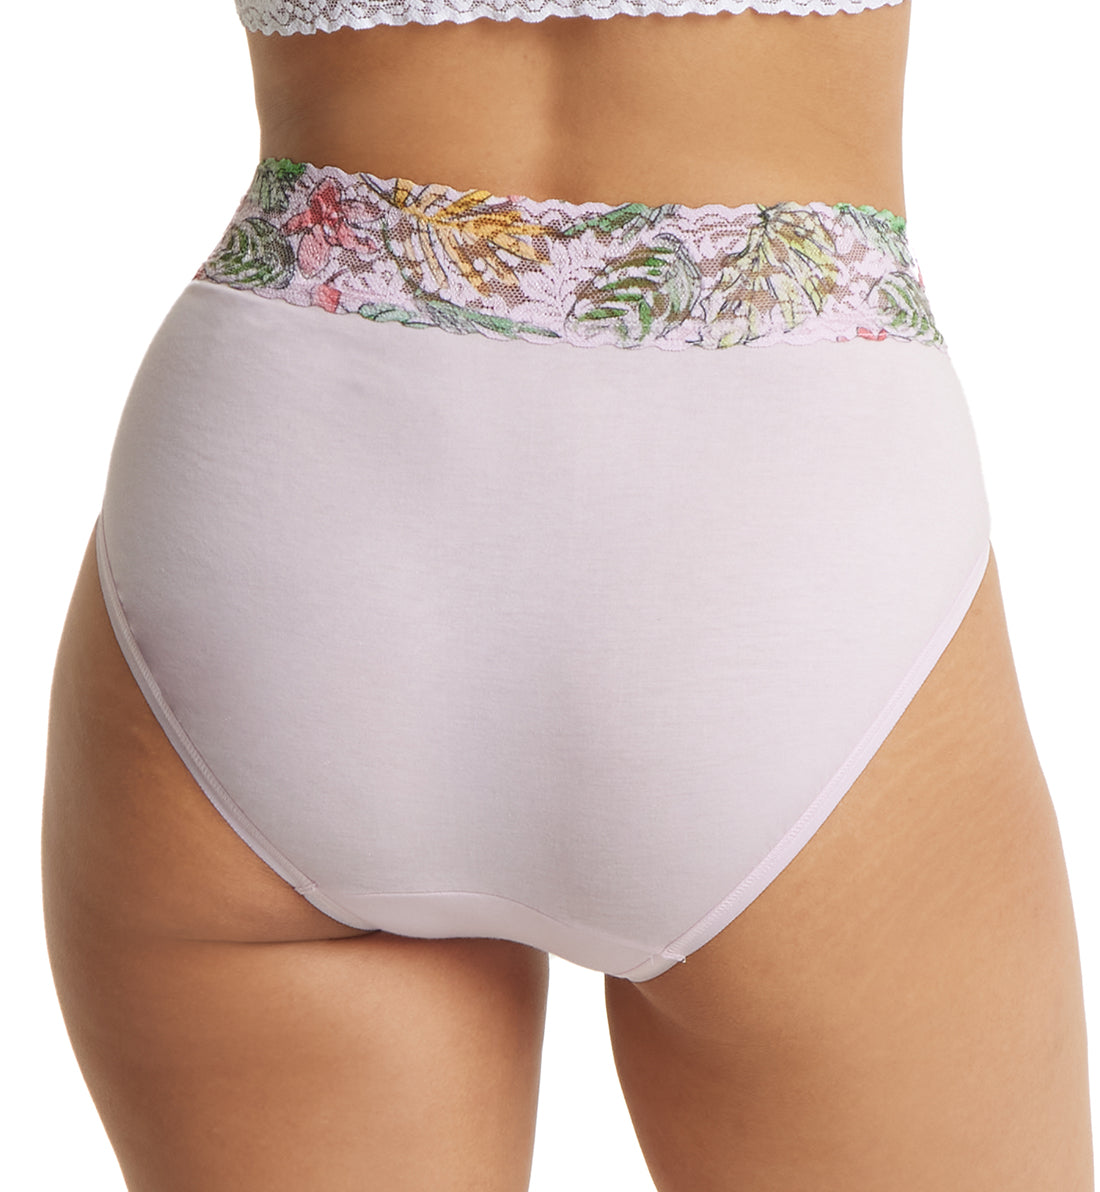 Hanky Panky Cotton-Spandex French Brief (892441),Small,Island Pink/Lovely Leaves - Lovely Leaves,Small